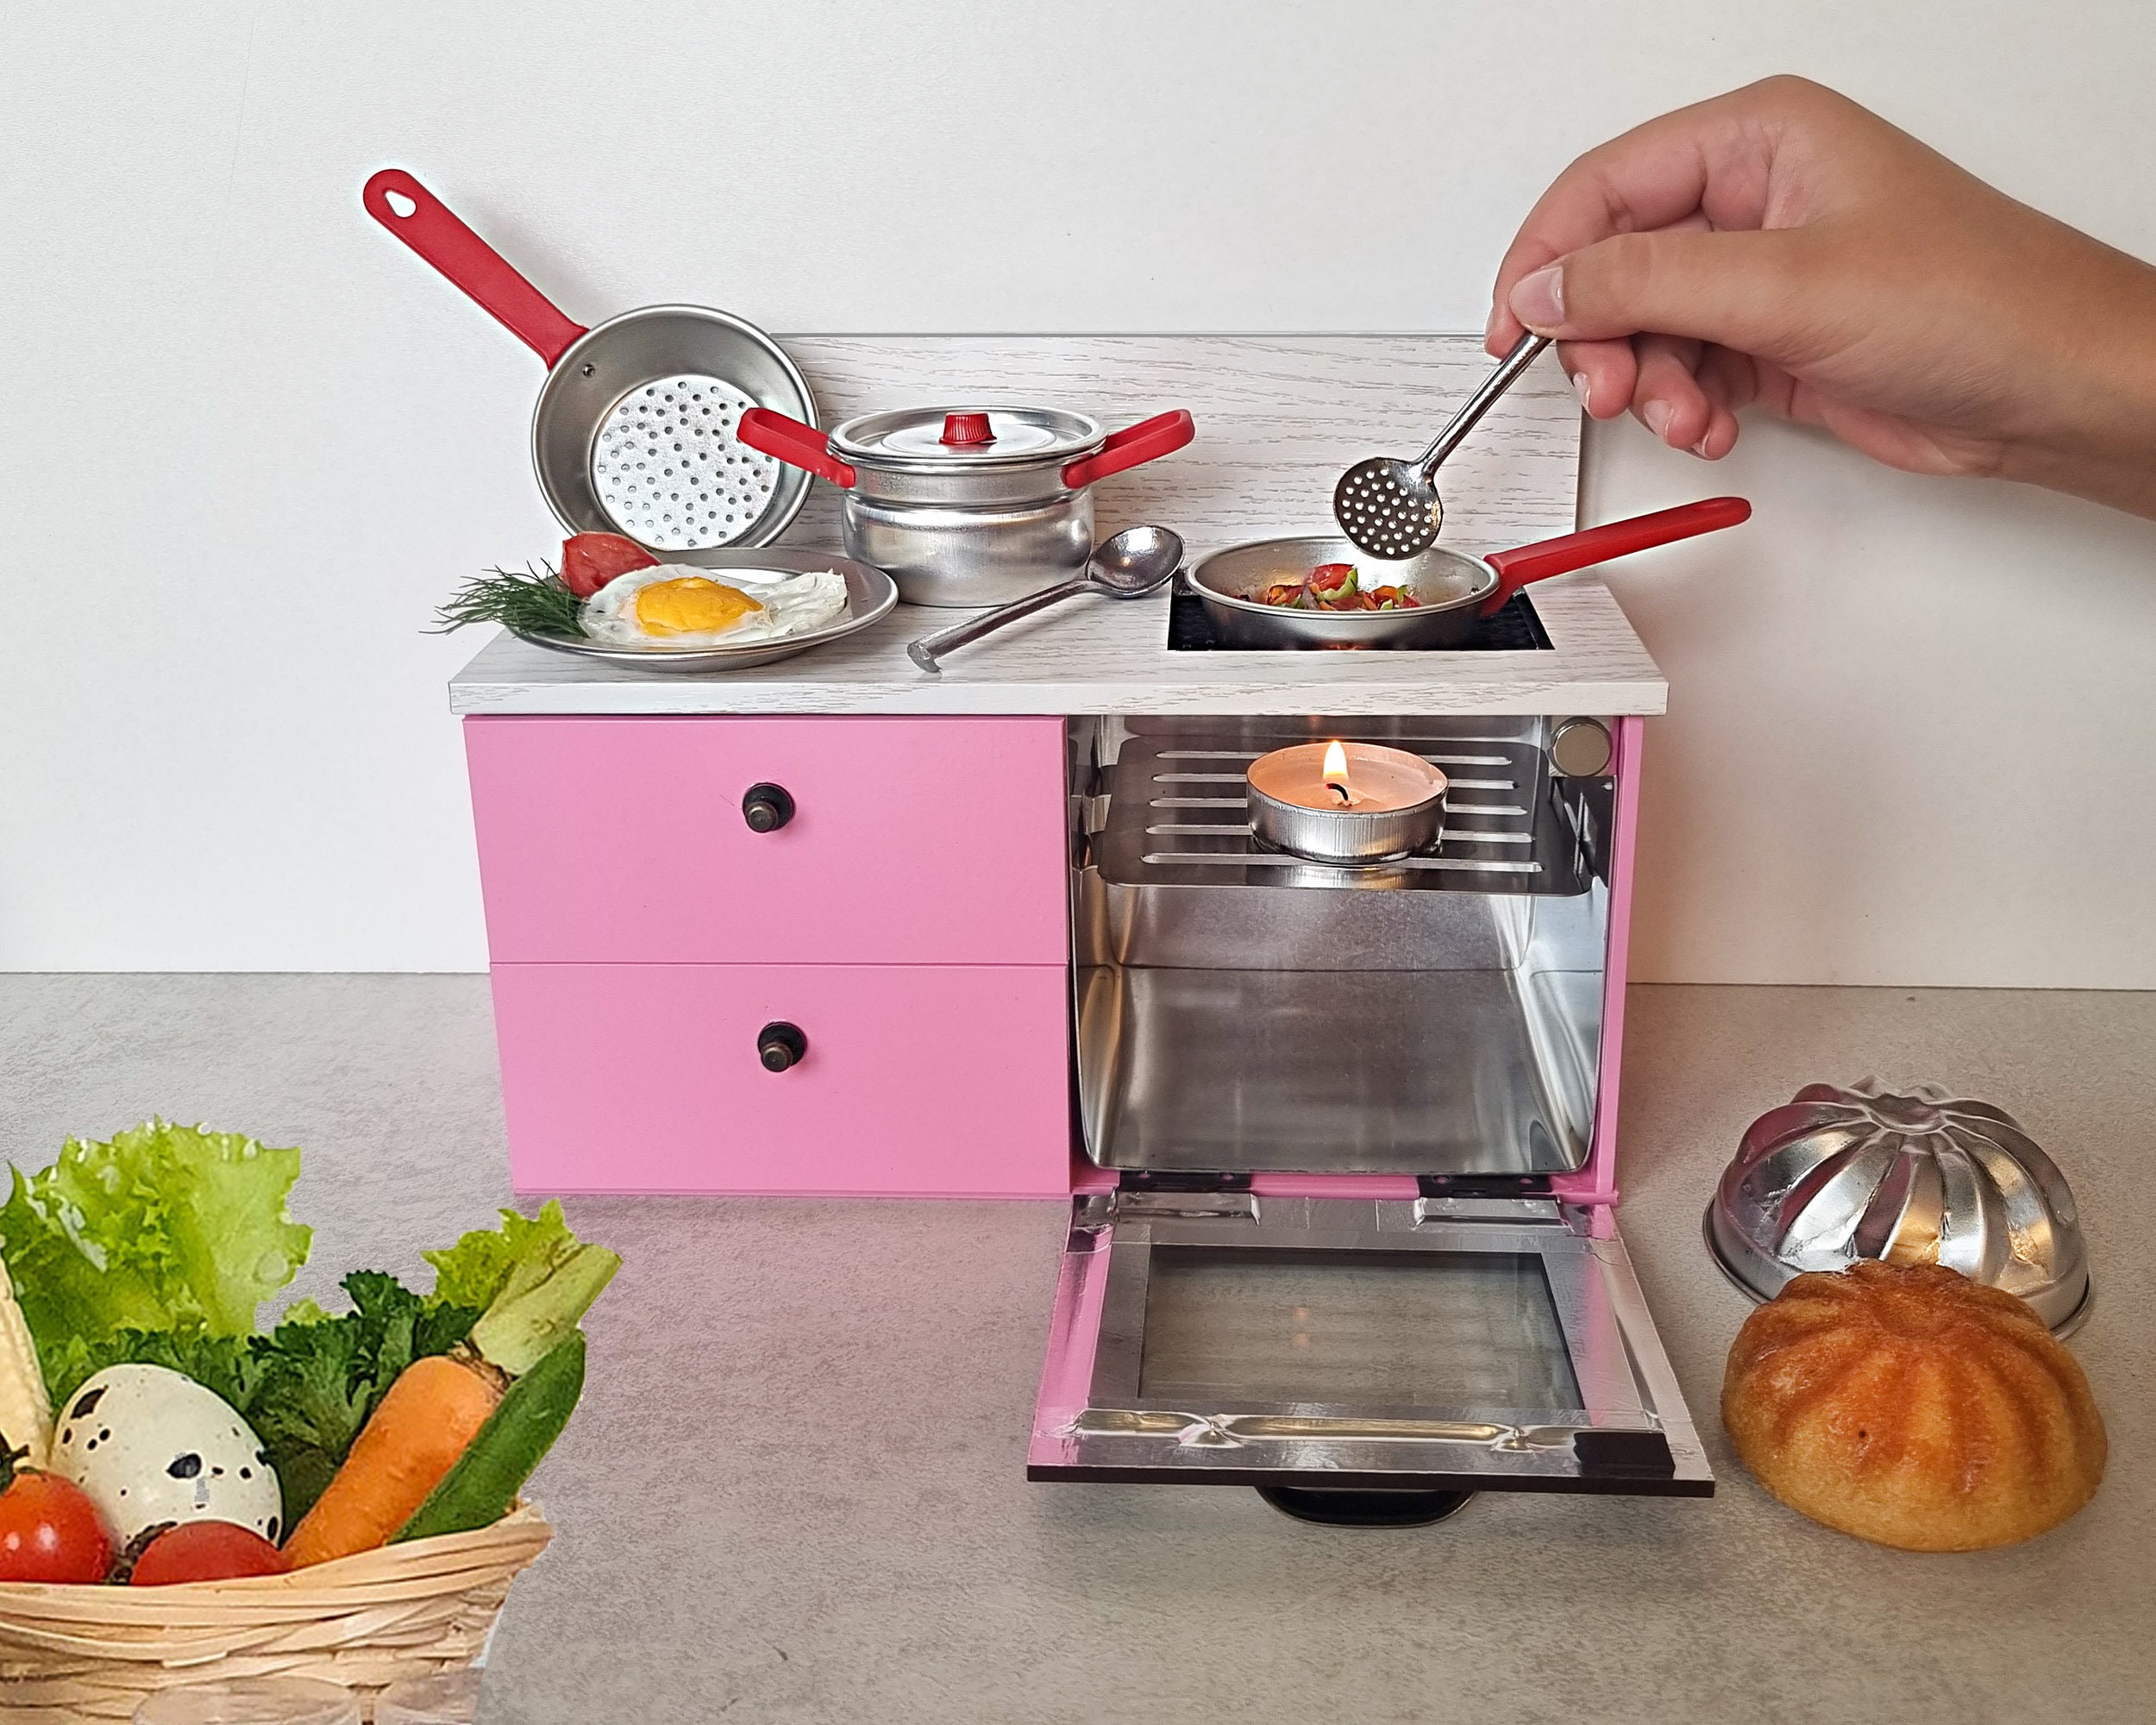 Mini Kitchen Set for Real Cooking / Pink Starter Tiny Cooking Set With Miniature  Cookware and Accessories 